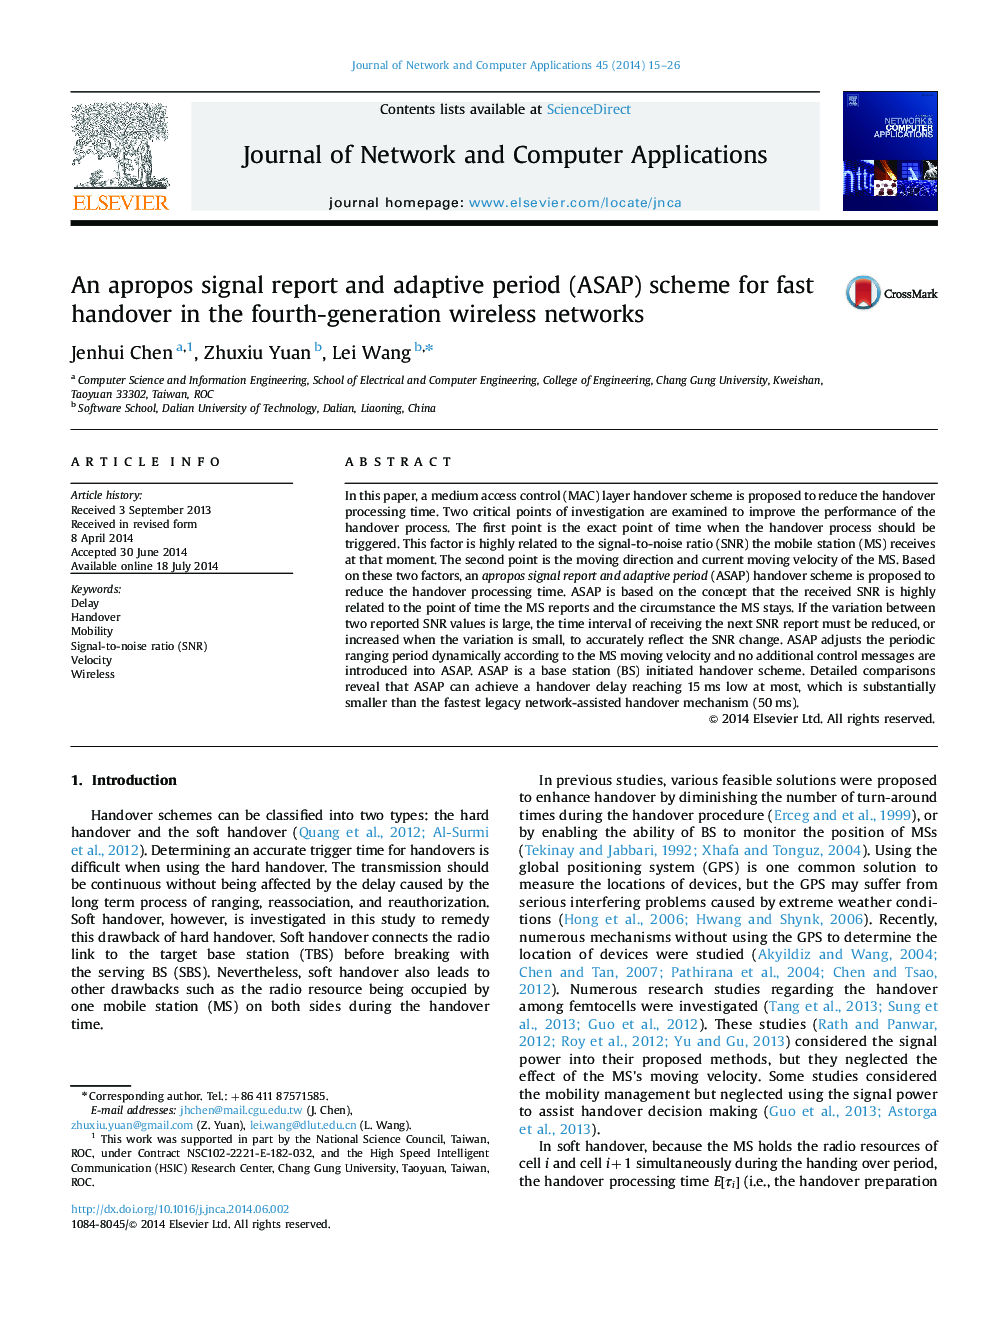 An apropos signal report and adaptive period (ASAP) scheme for fast handover in the fourth-generation wireless networks